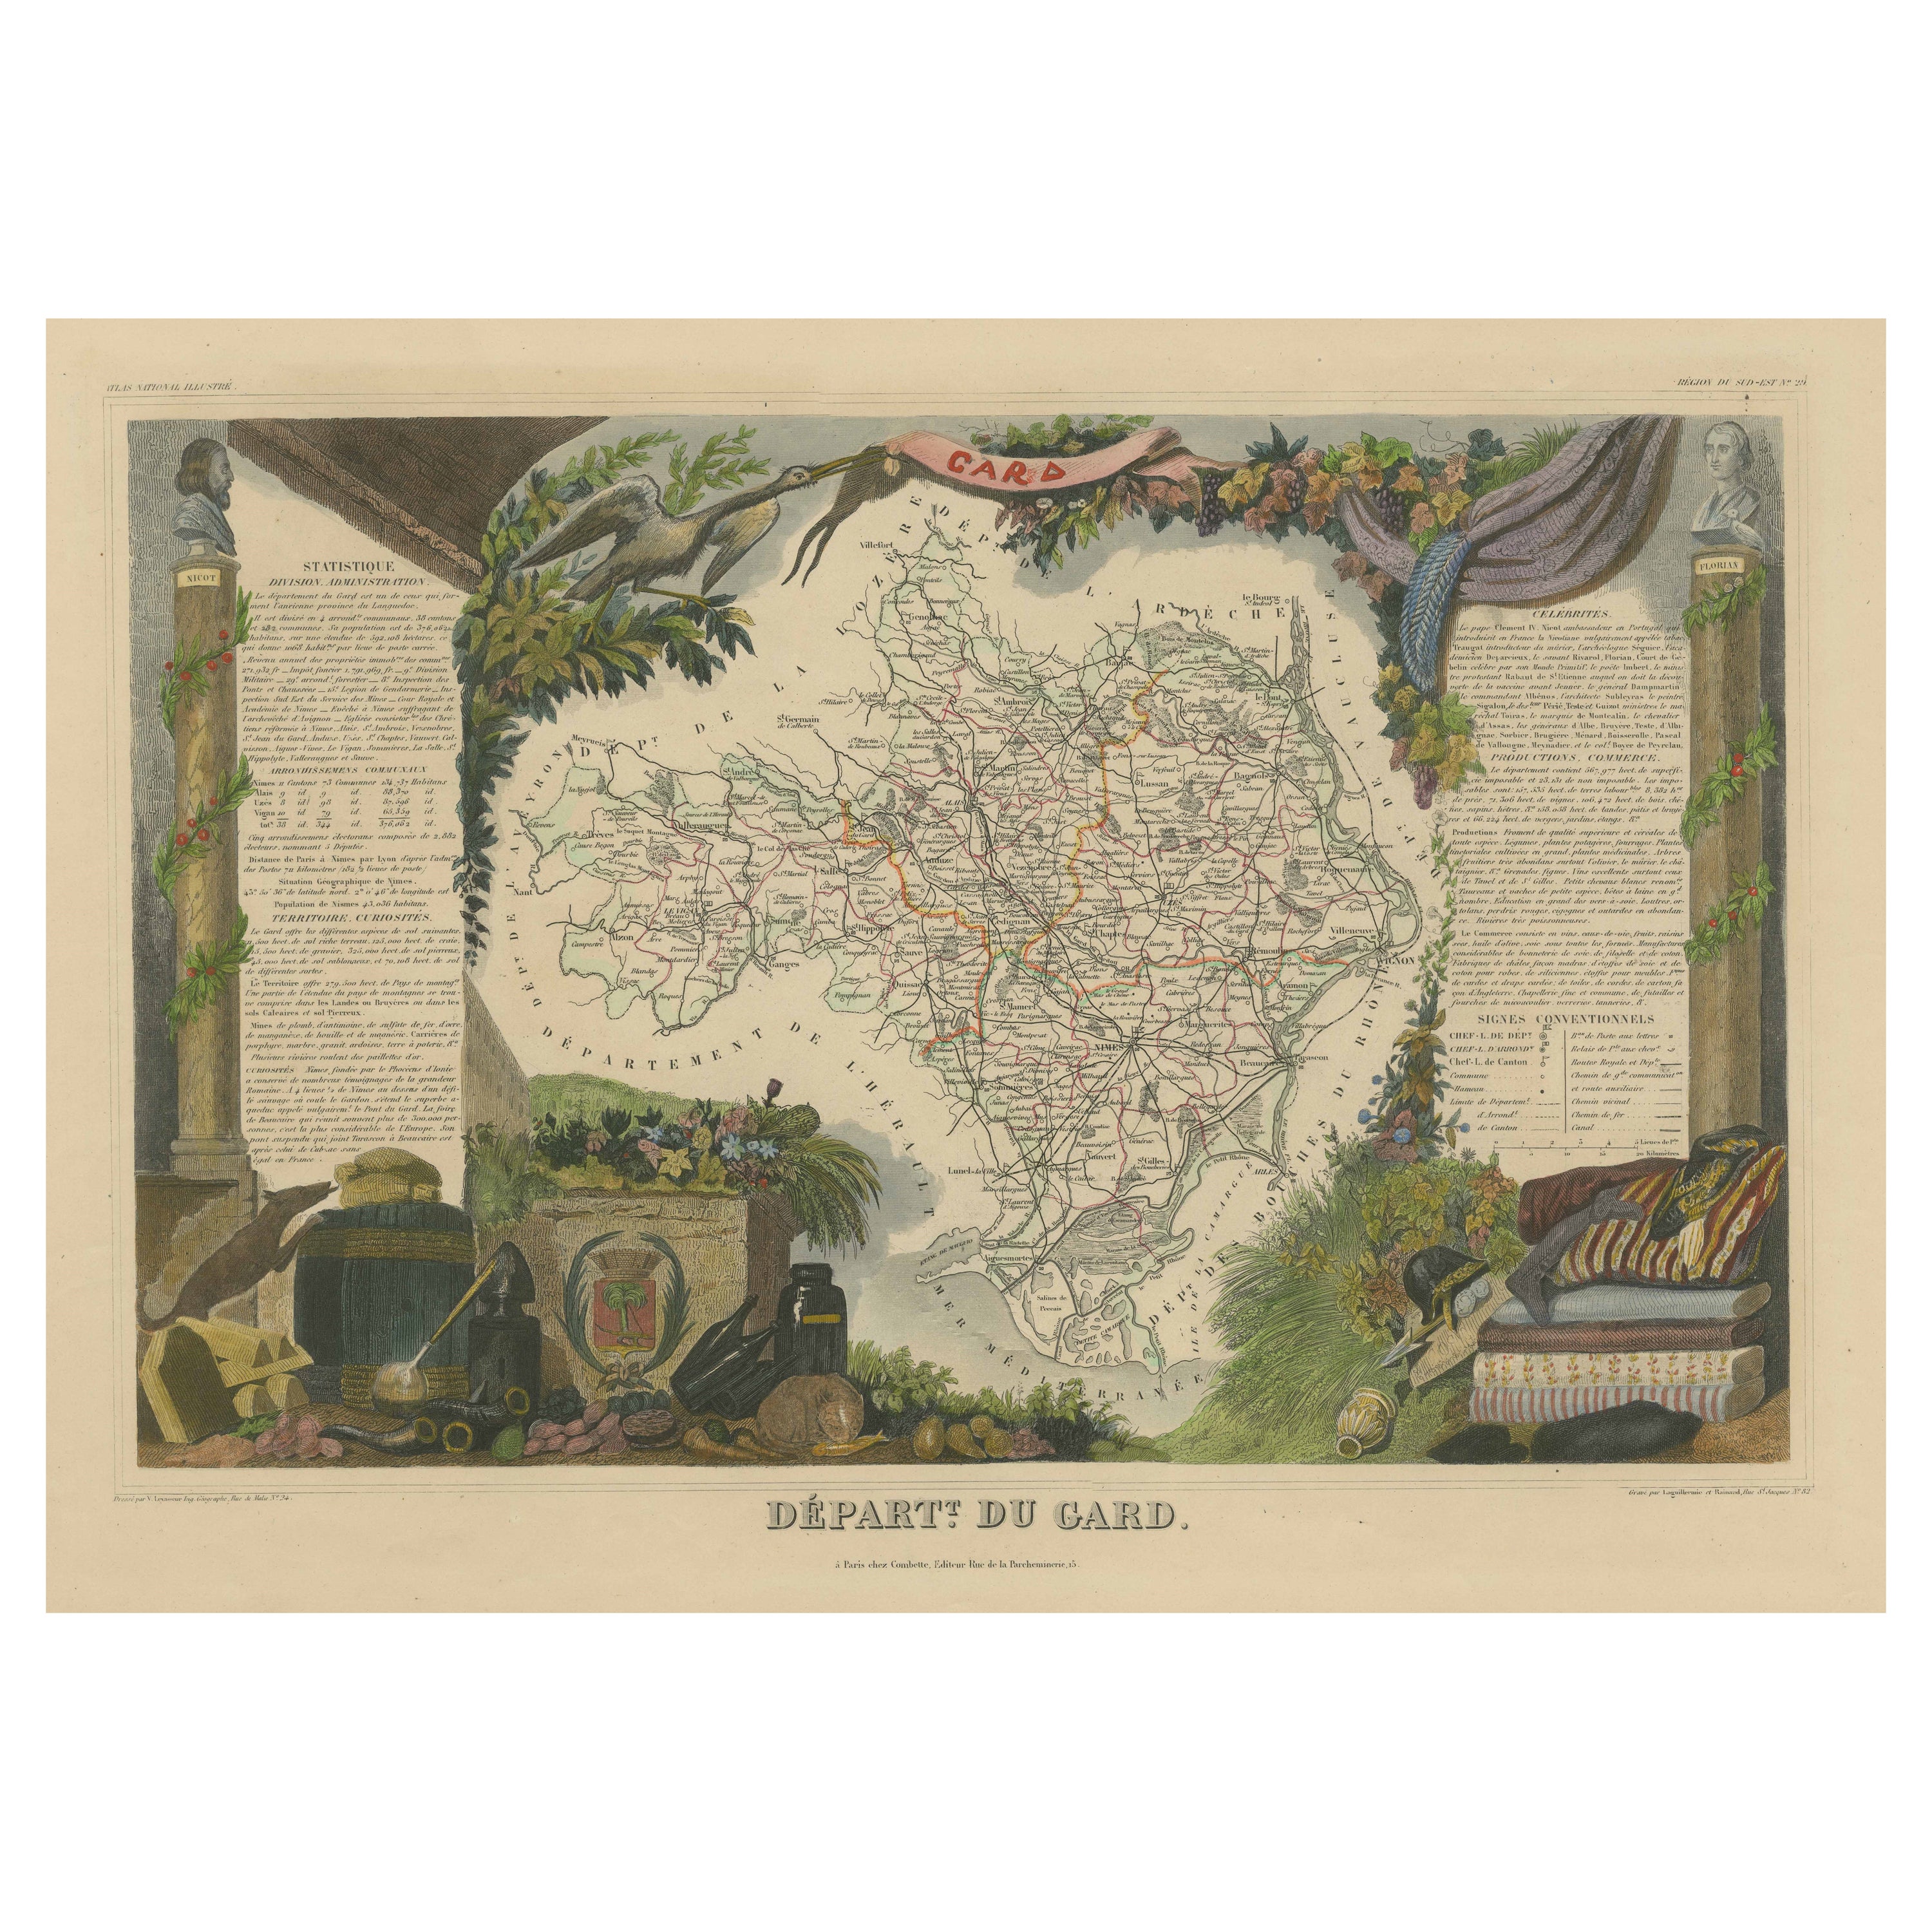 Hand Colored Antique Map of the Department of Gard, France